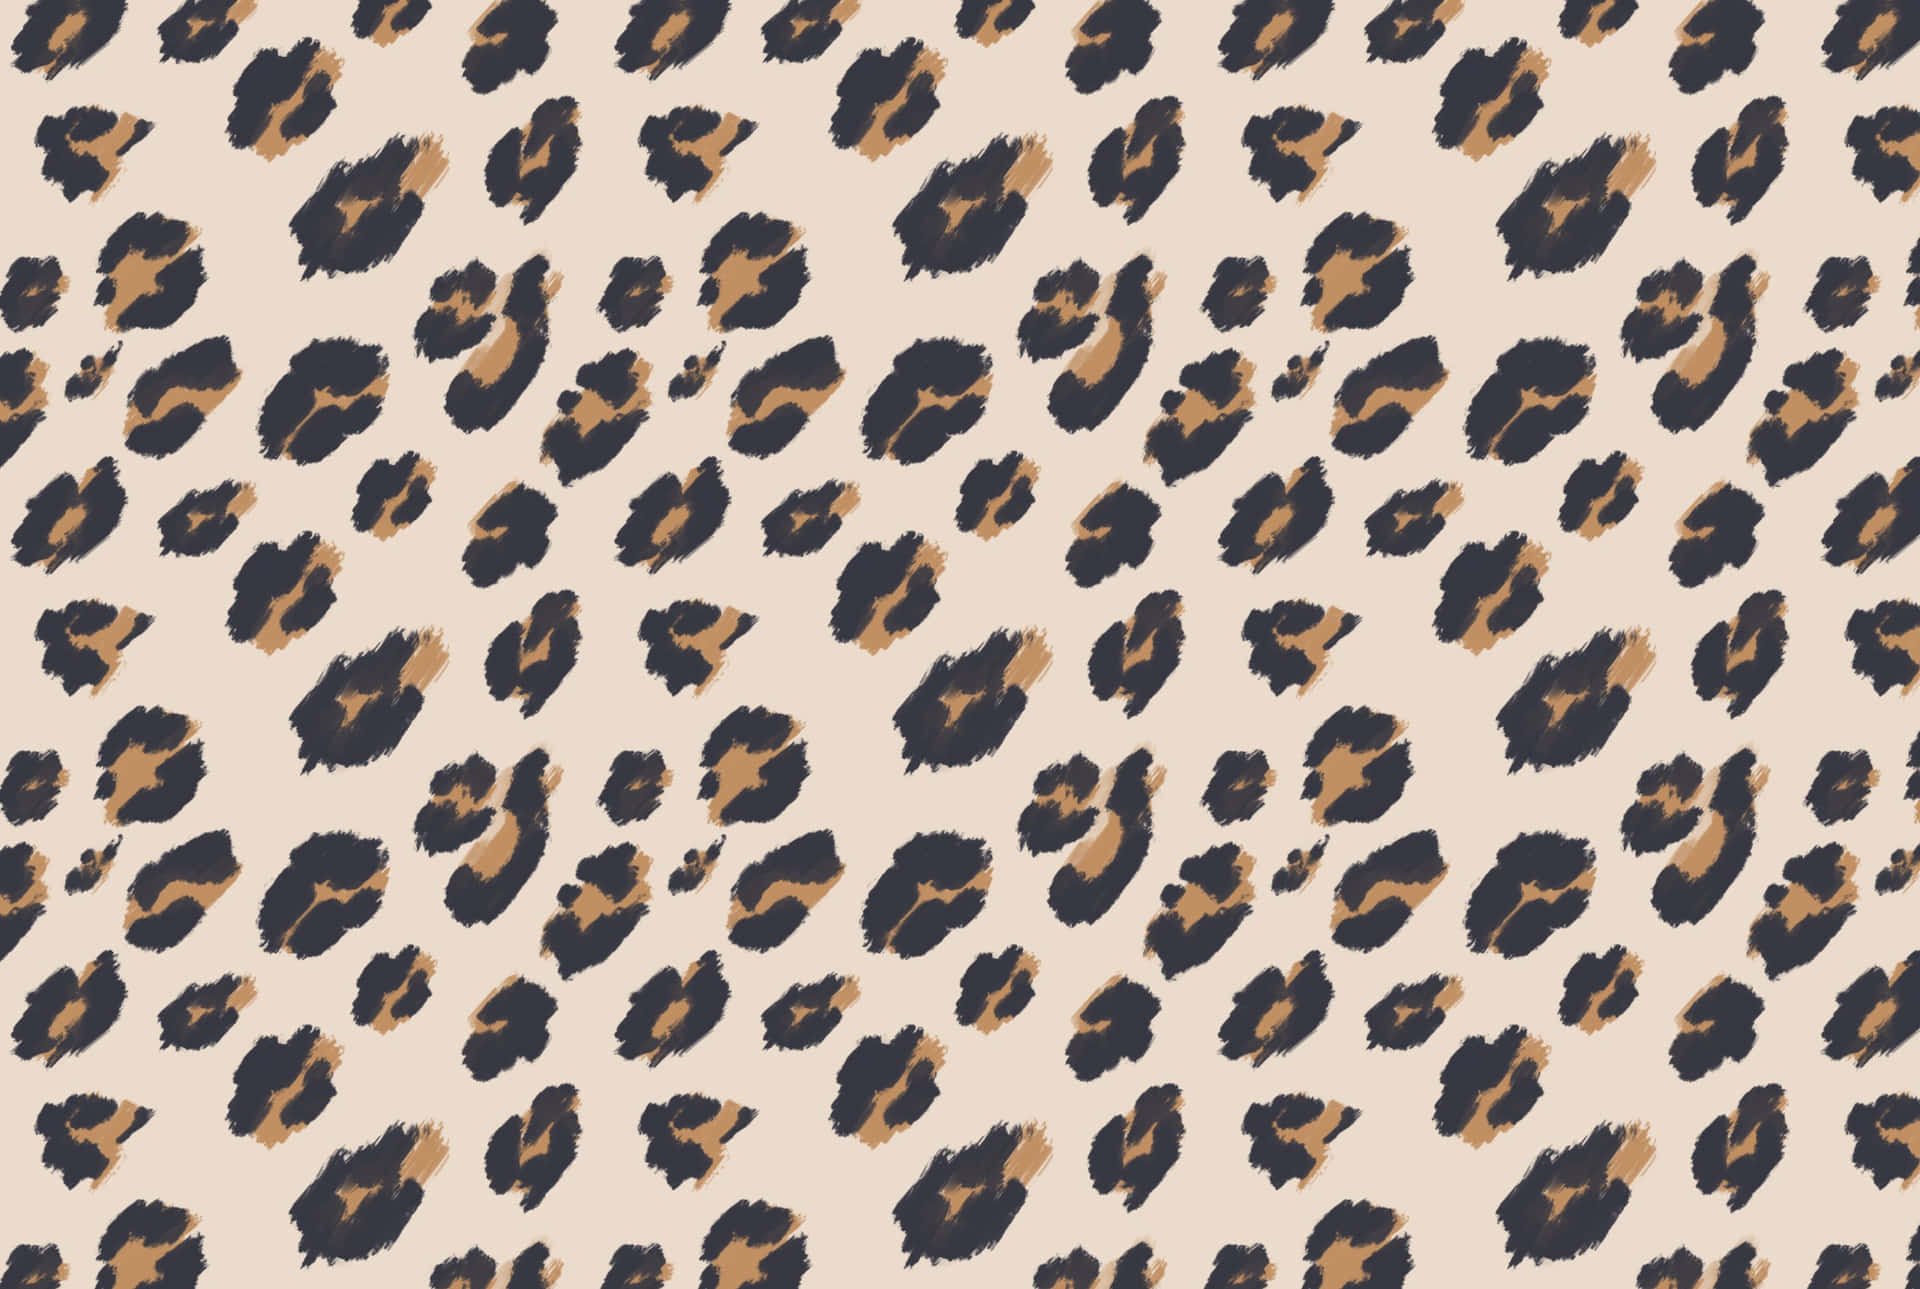 Leopard Print Background s for FREE